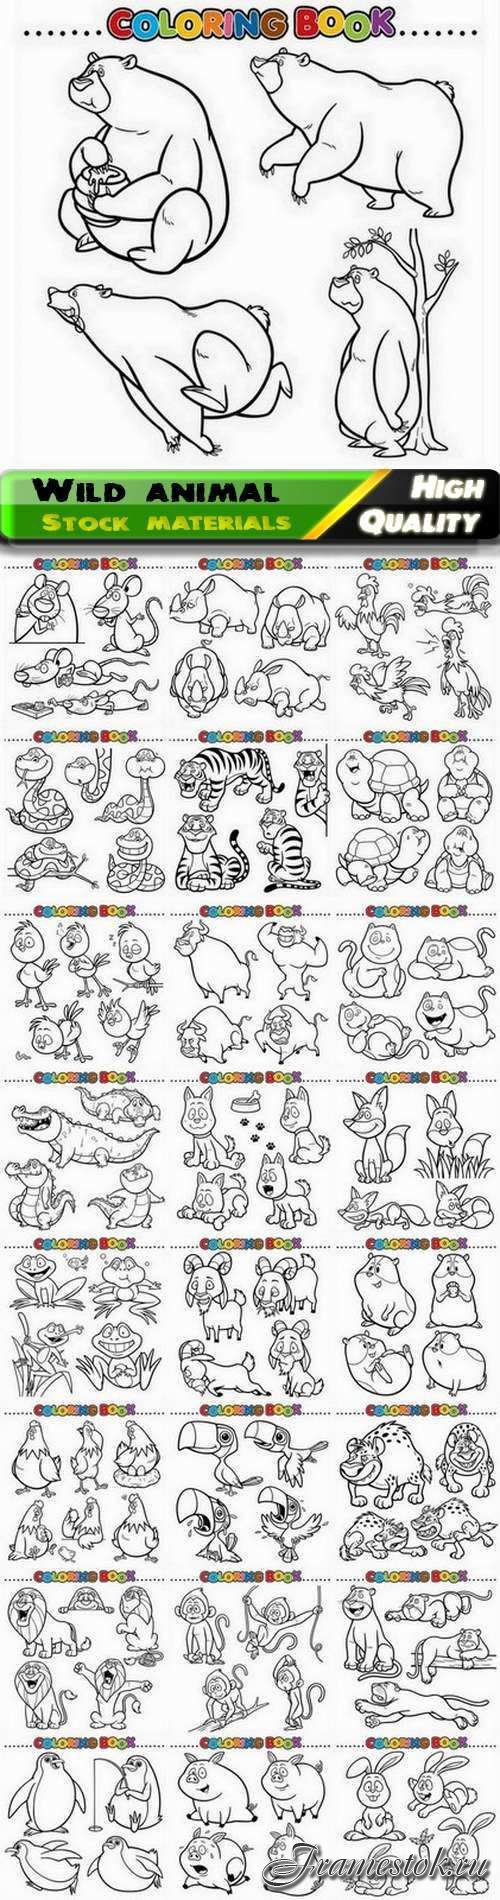 Coloring book with cute wild animal education game for kids - 25 Eps